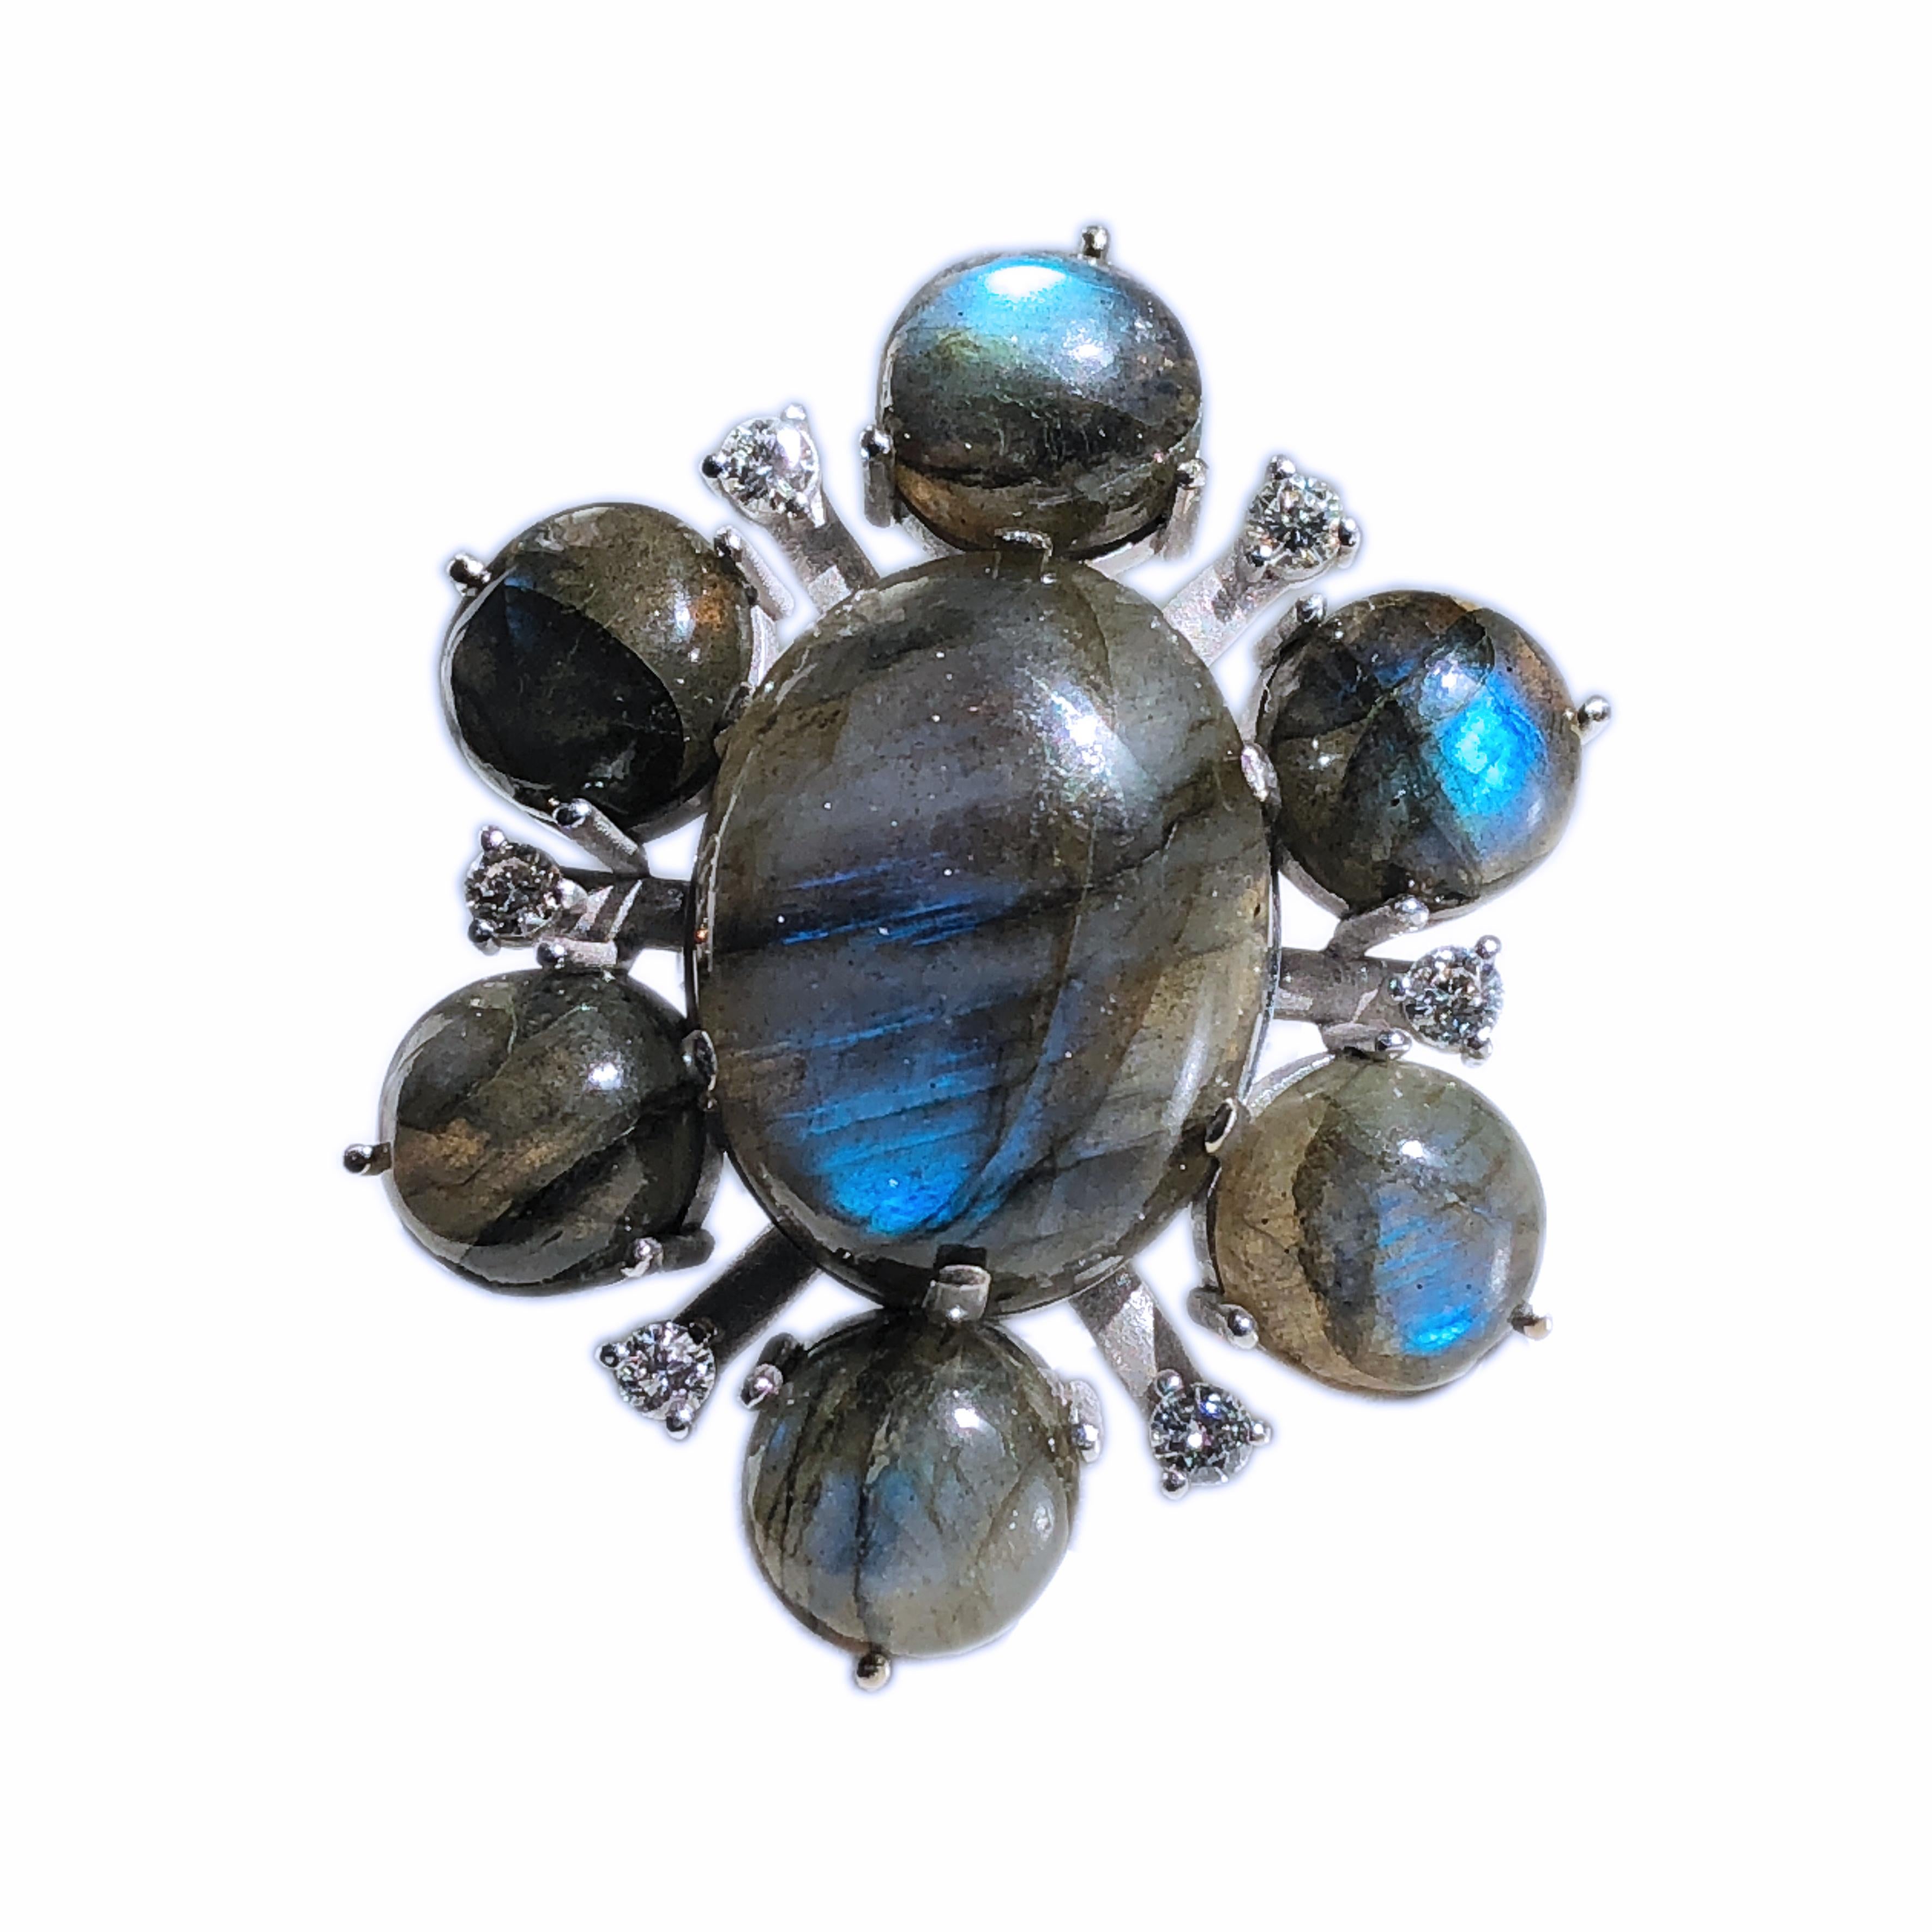 Contemporary One-of-a-Kind 55.20 Carat Labradorite White Diamond Peacock Blue Cocktail Ring